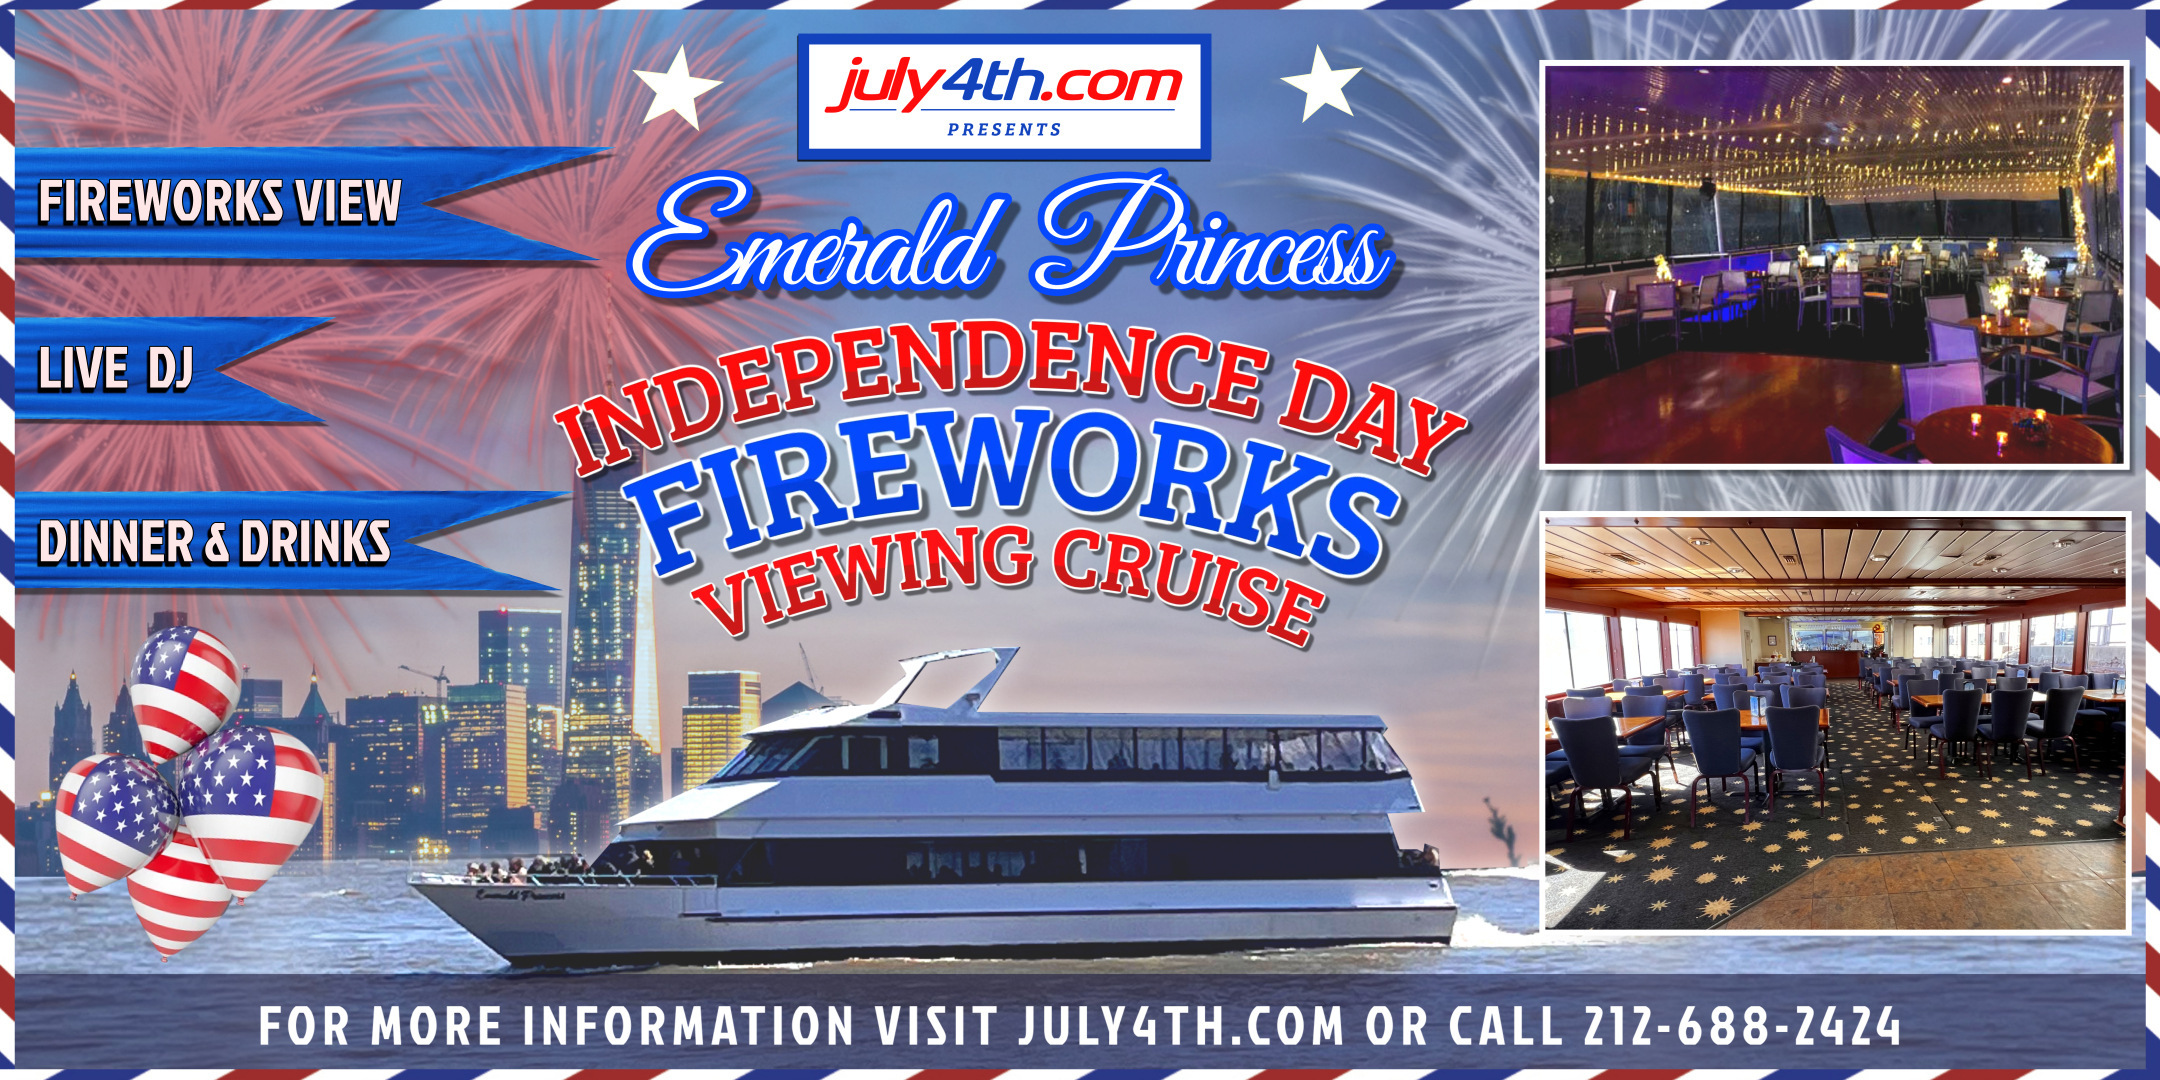 July 4th Family Fireworks Cruise Aboard the Emerald Princess Yacht, New York, United States